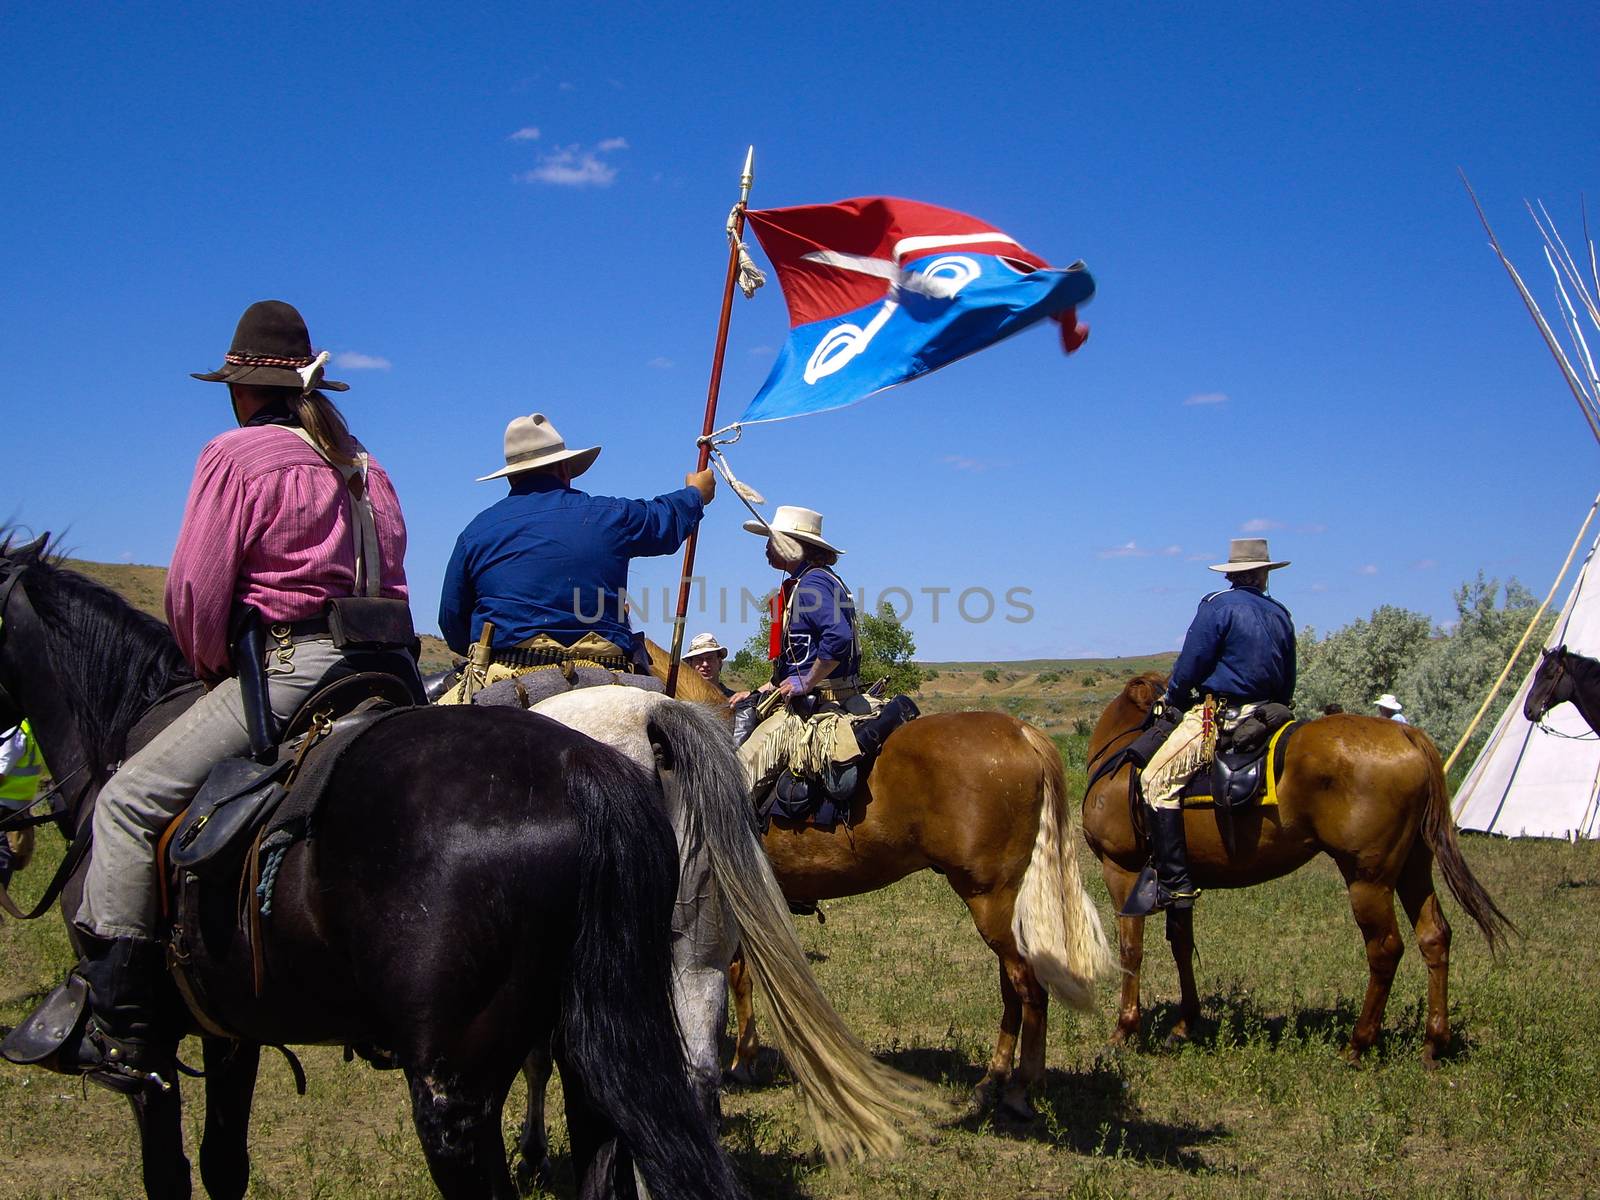 Crow Agency, Montana USA - June 27, 2009: Reenactment of the Battle of the Little Bighorn known as Custer's Last Stand. U.S. 7th Cavalry soldiers raise their standard flag on the battle field.